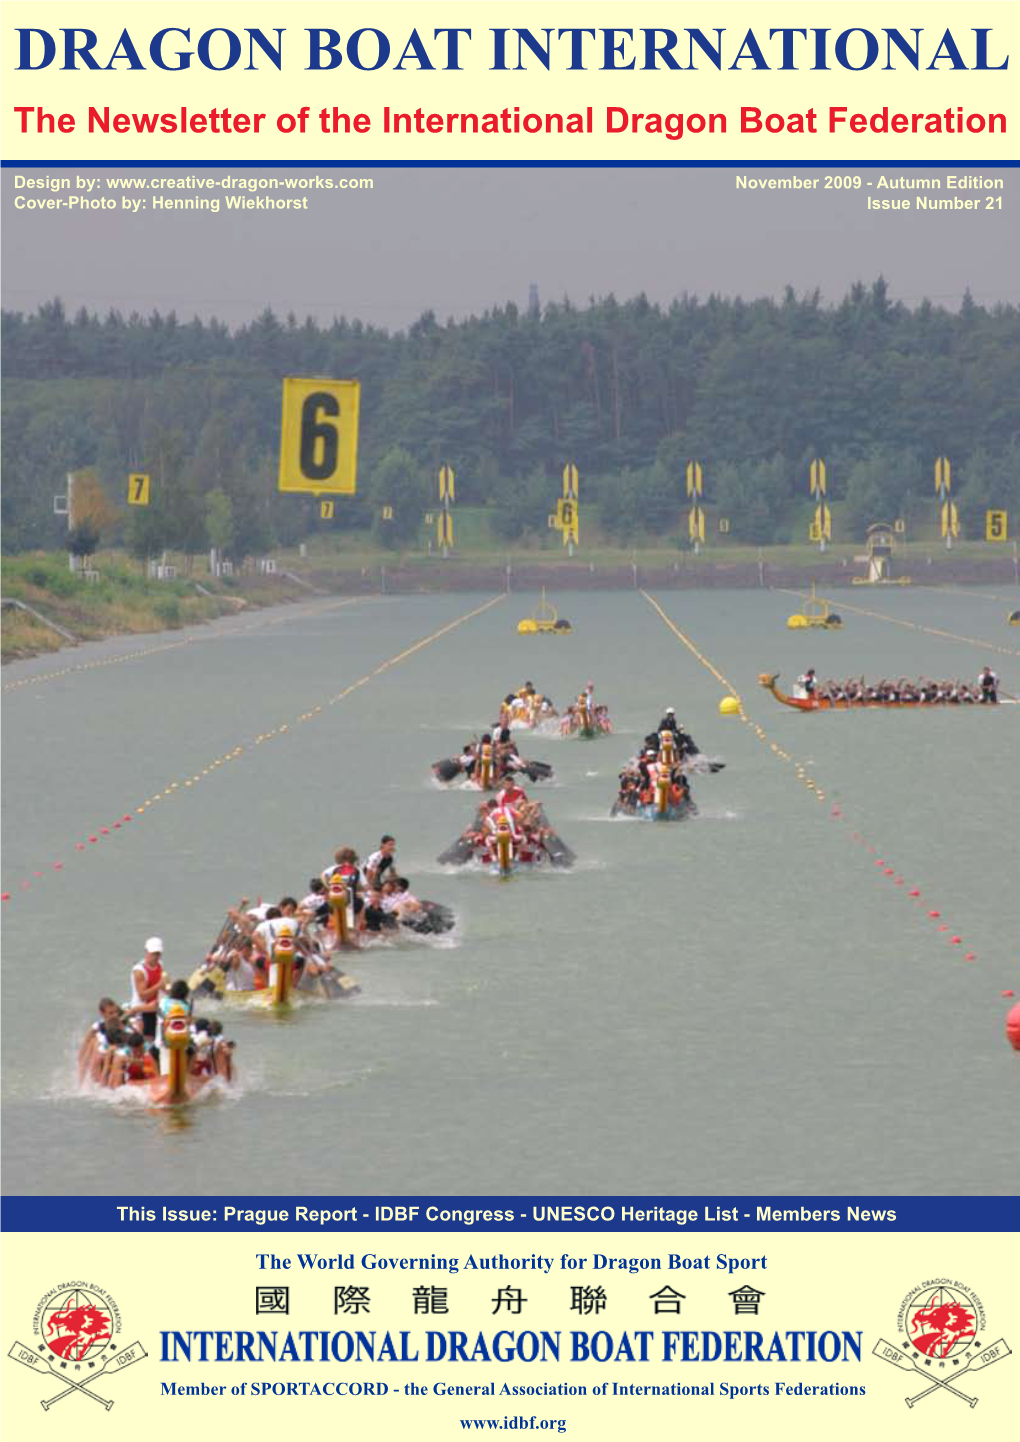 The Newsletter of the International Dragon Boat Federation